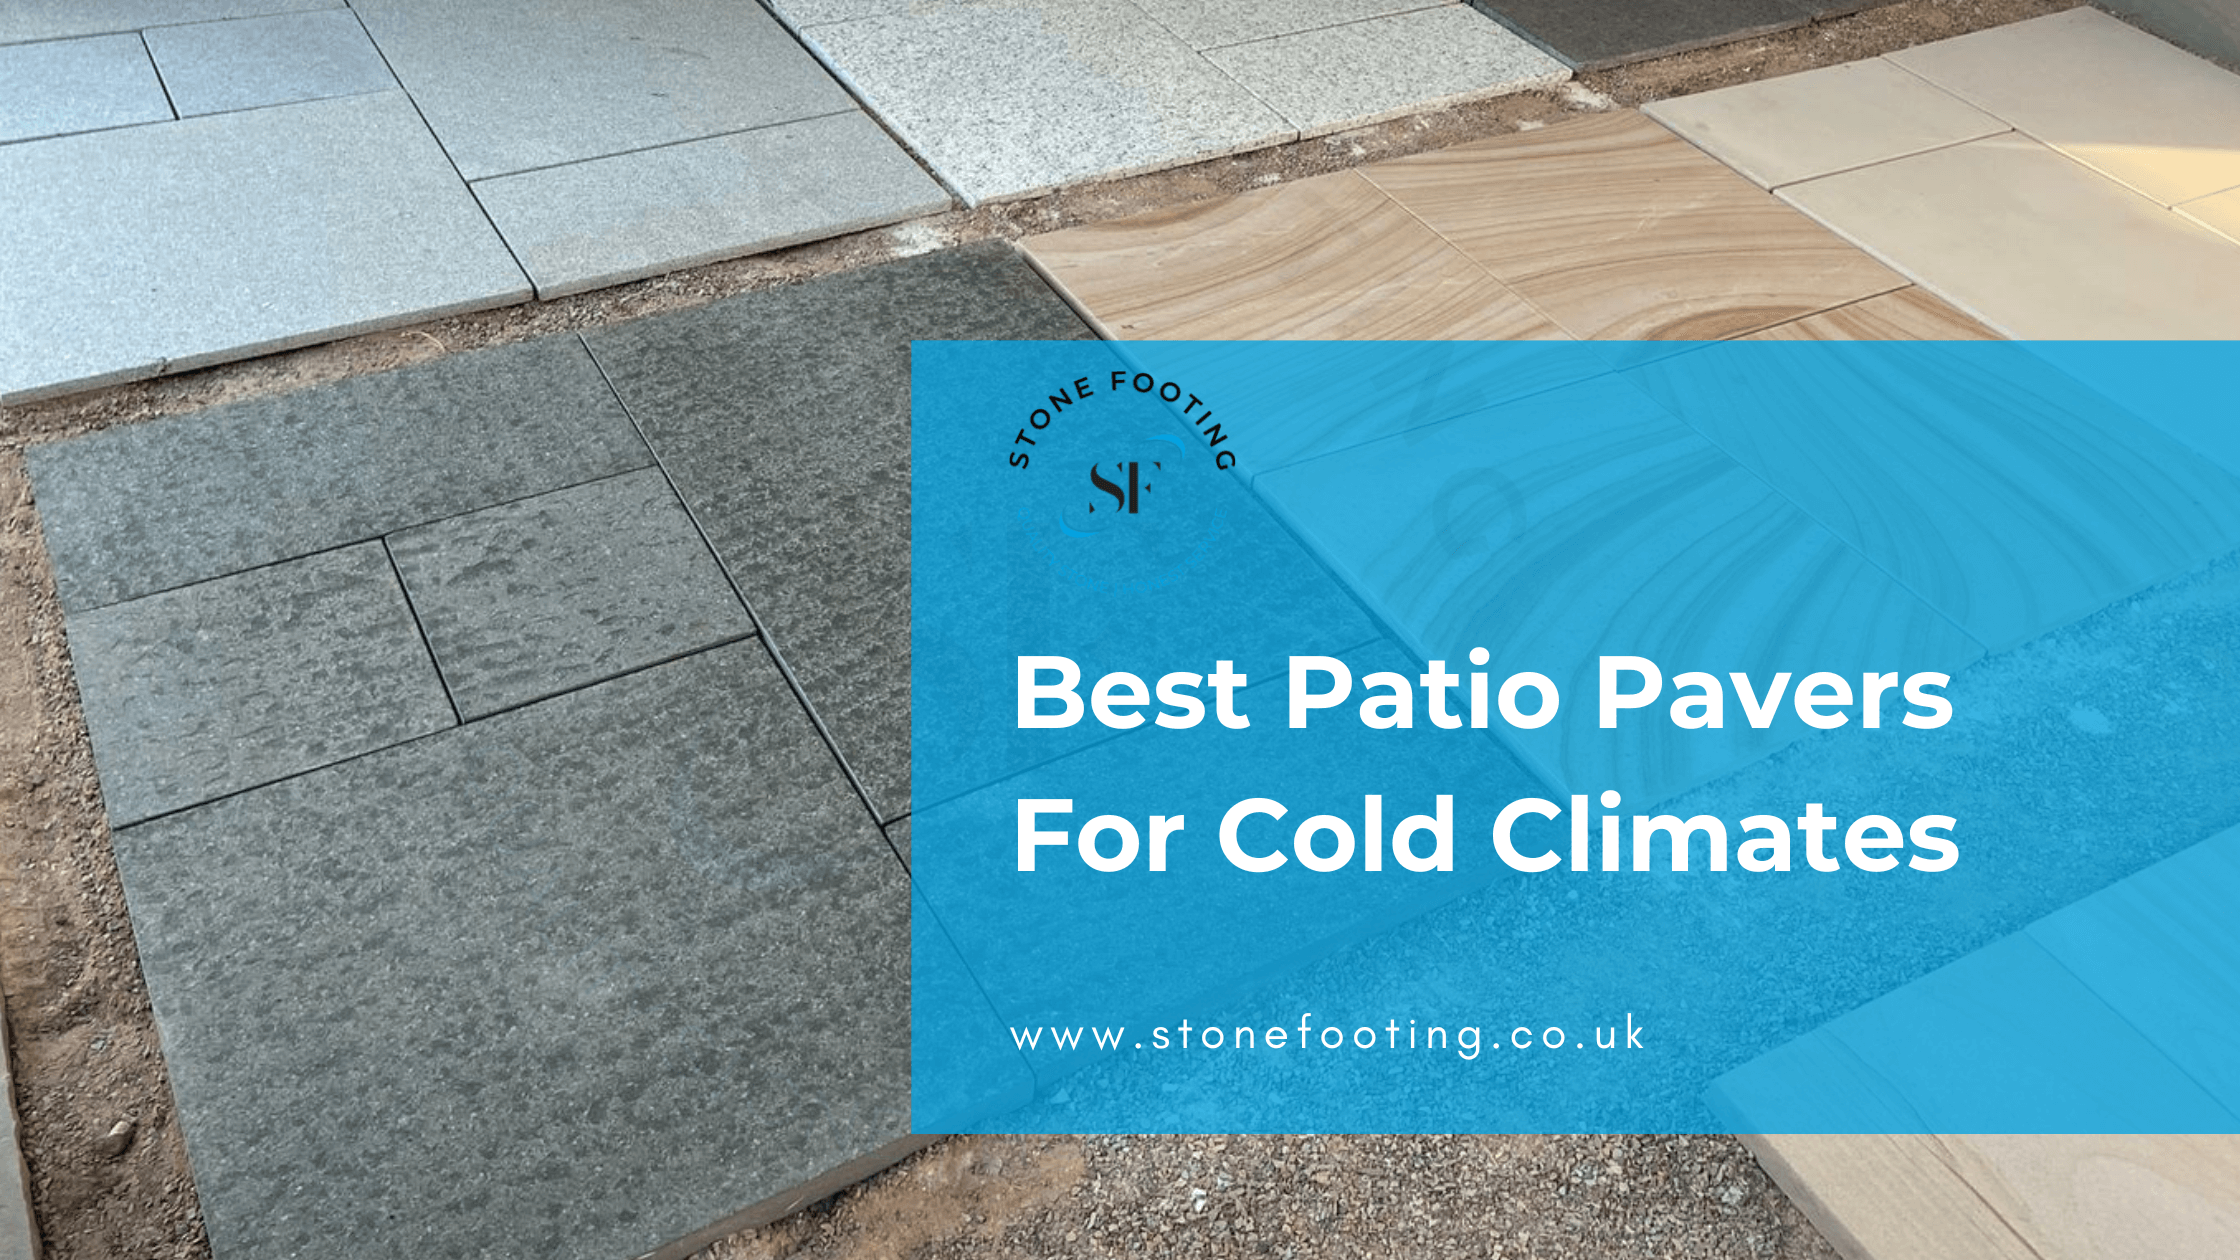 Best Patio Pavers For Cold Climates